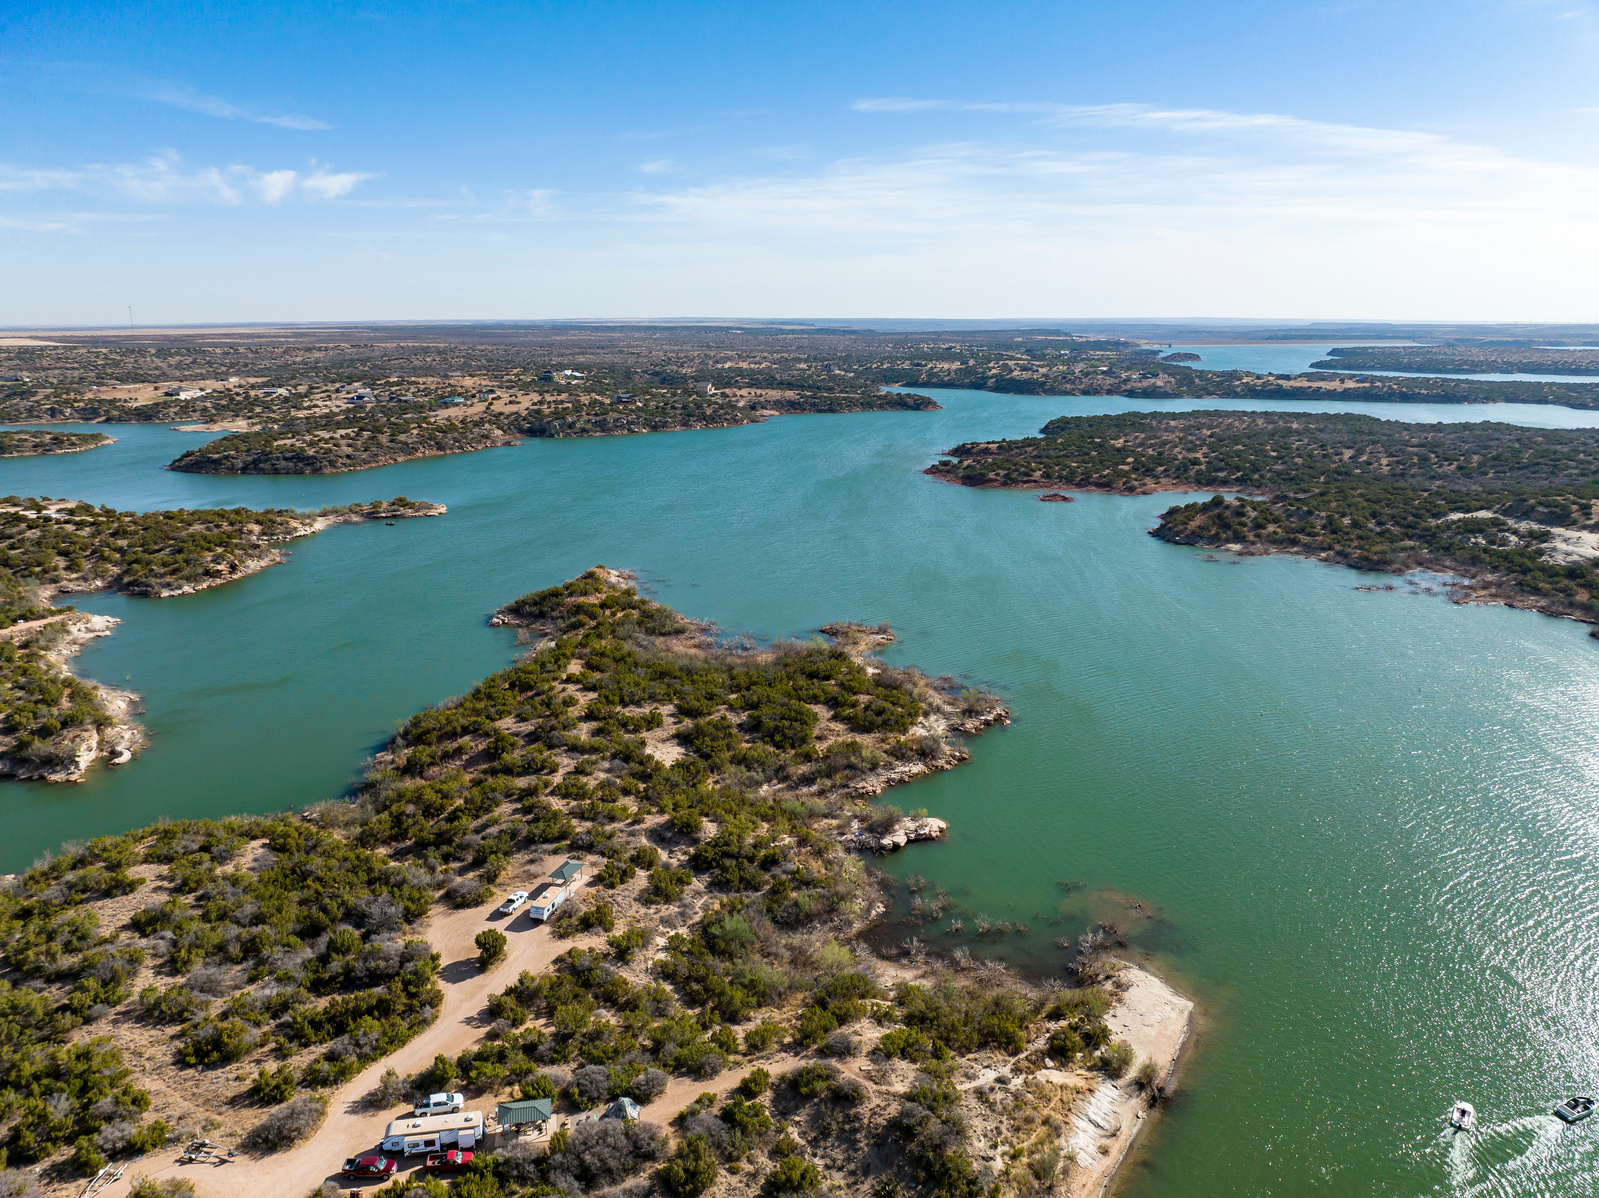 A getaway for Lubbock Residents, Lake Alan Henry is about one hour away.